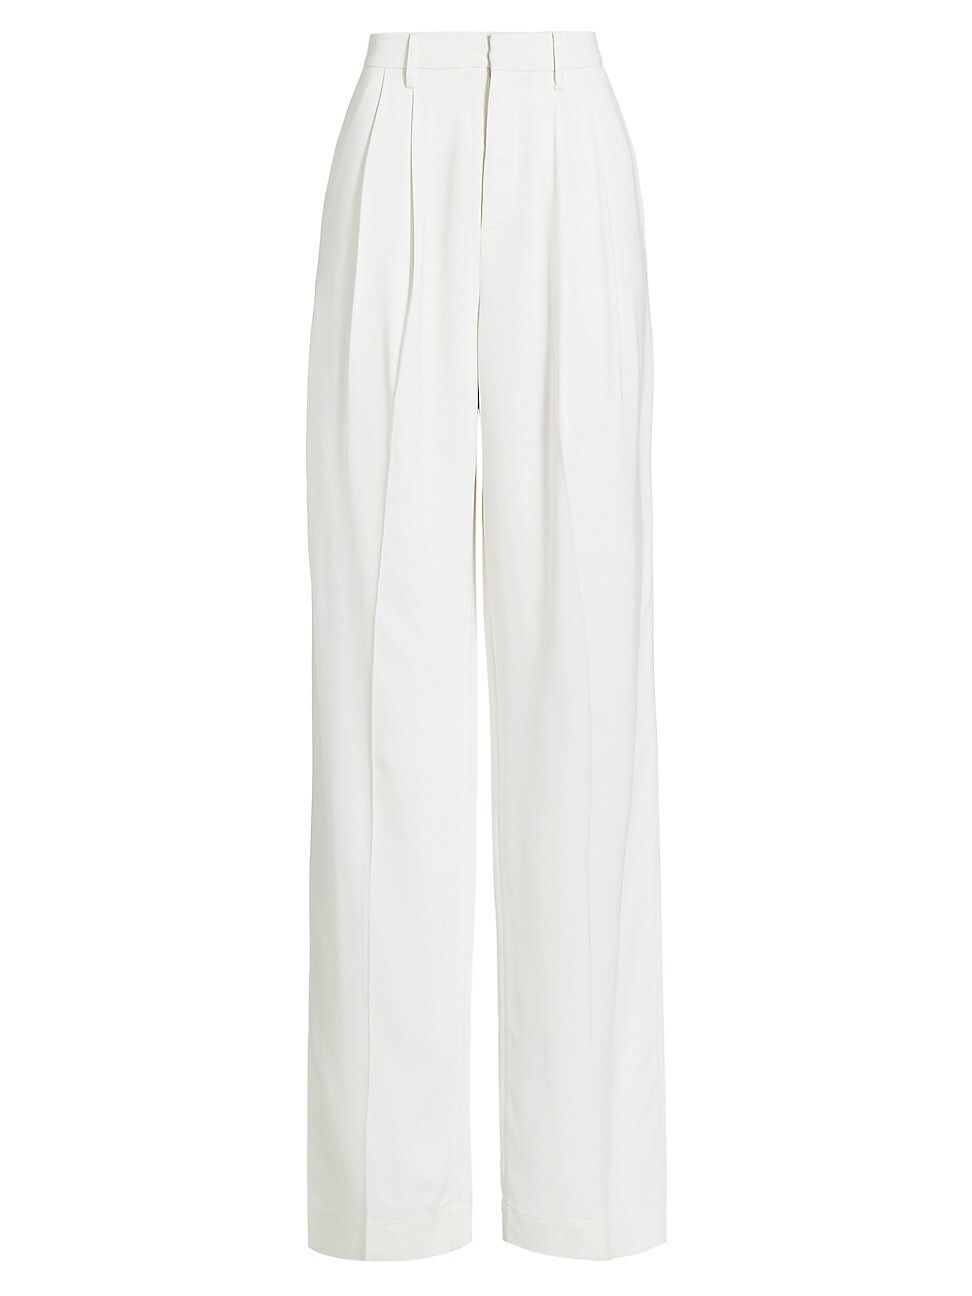 Women's High-Waisted Trousers - Ivory - Size 4 | Saks Fifth Avenue